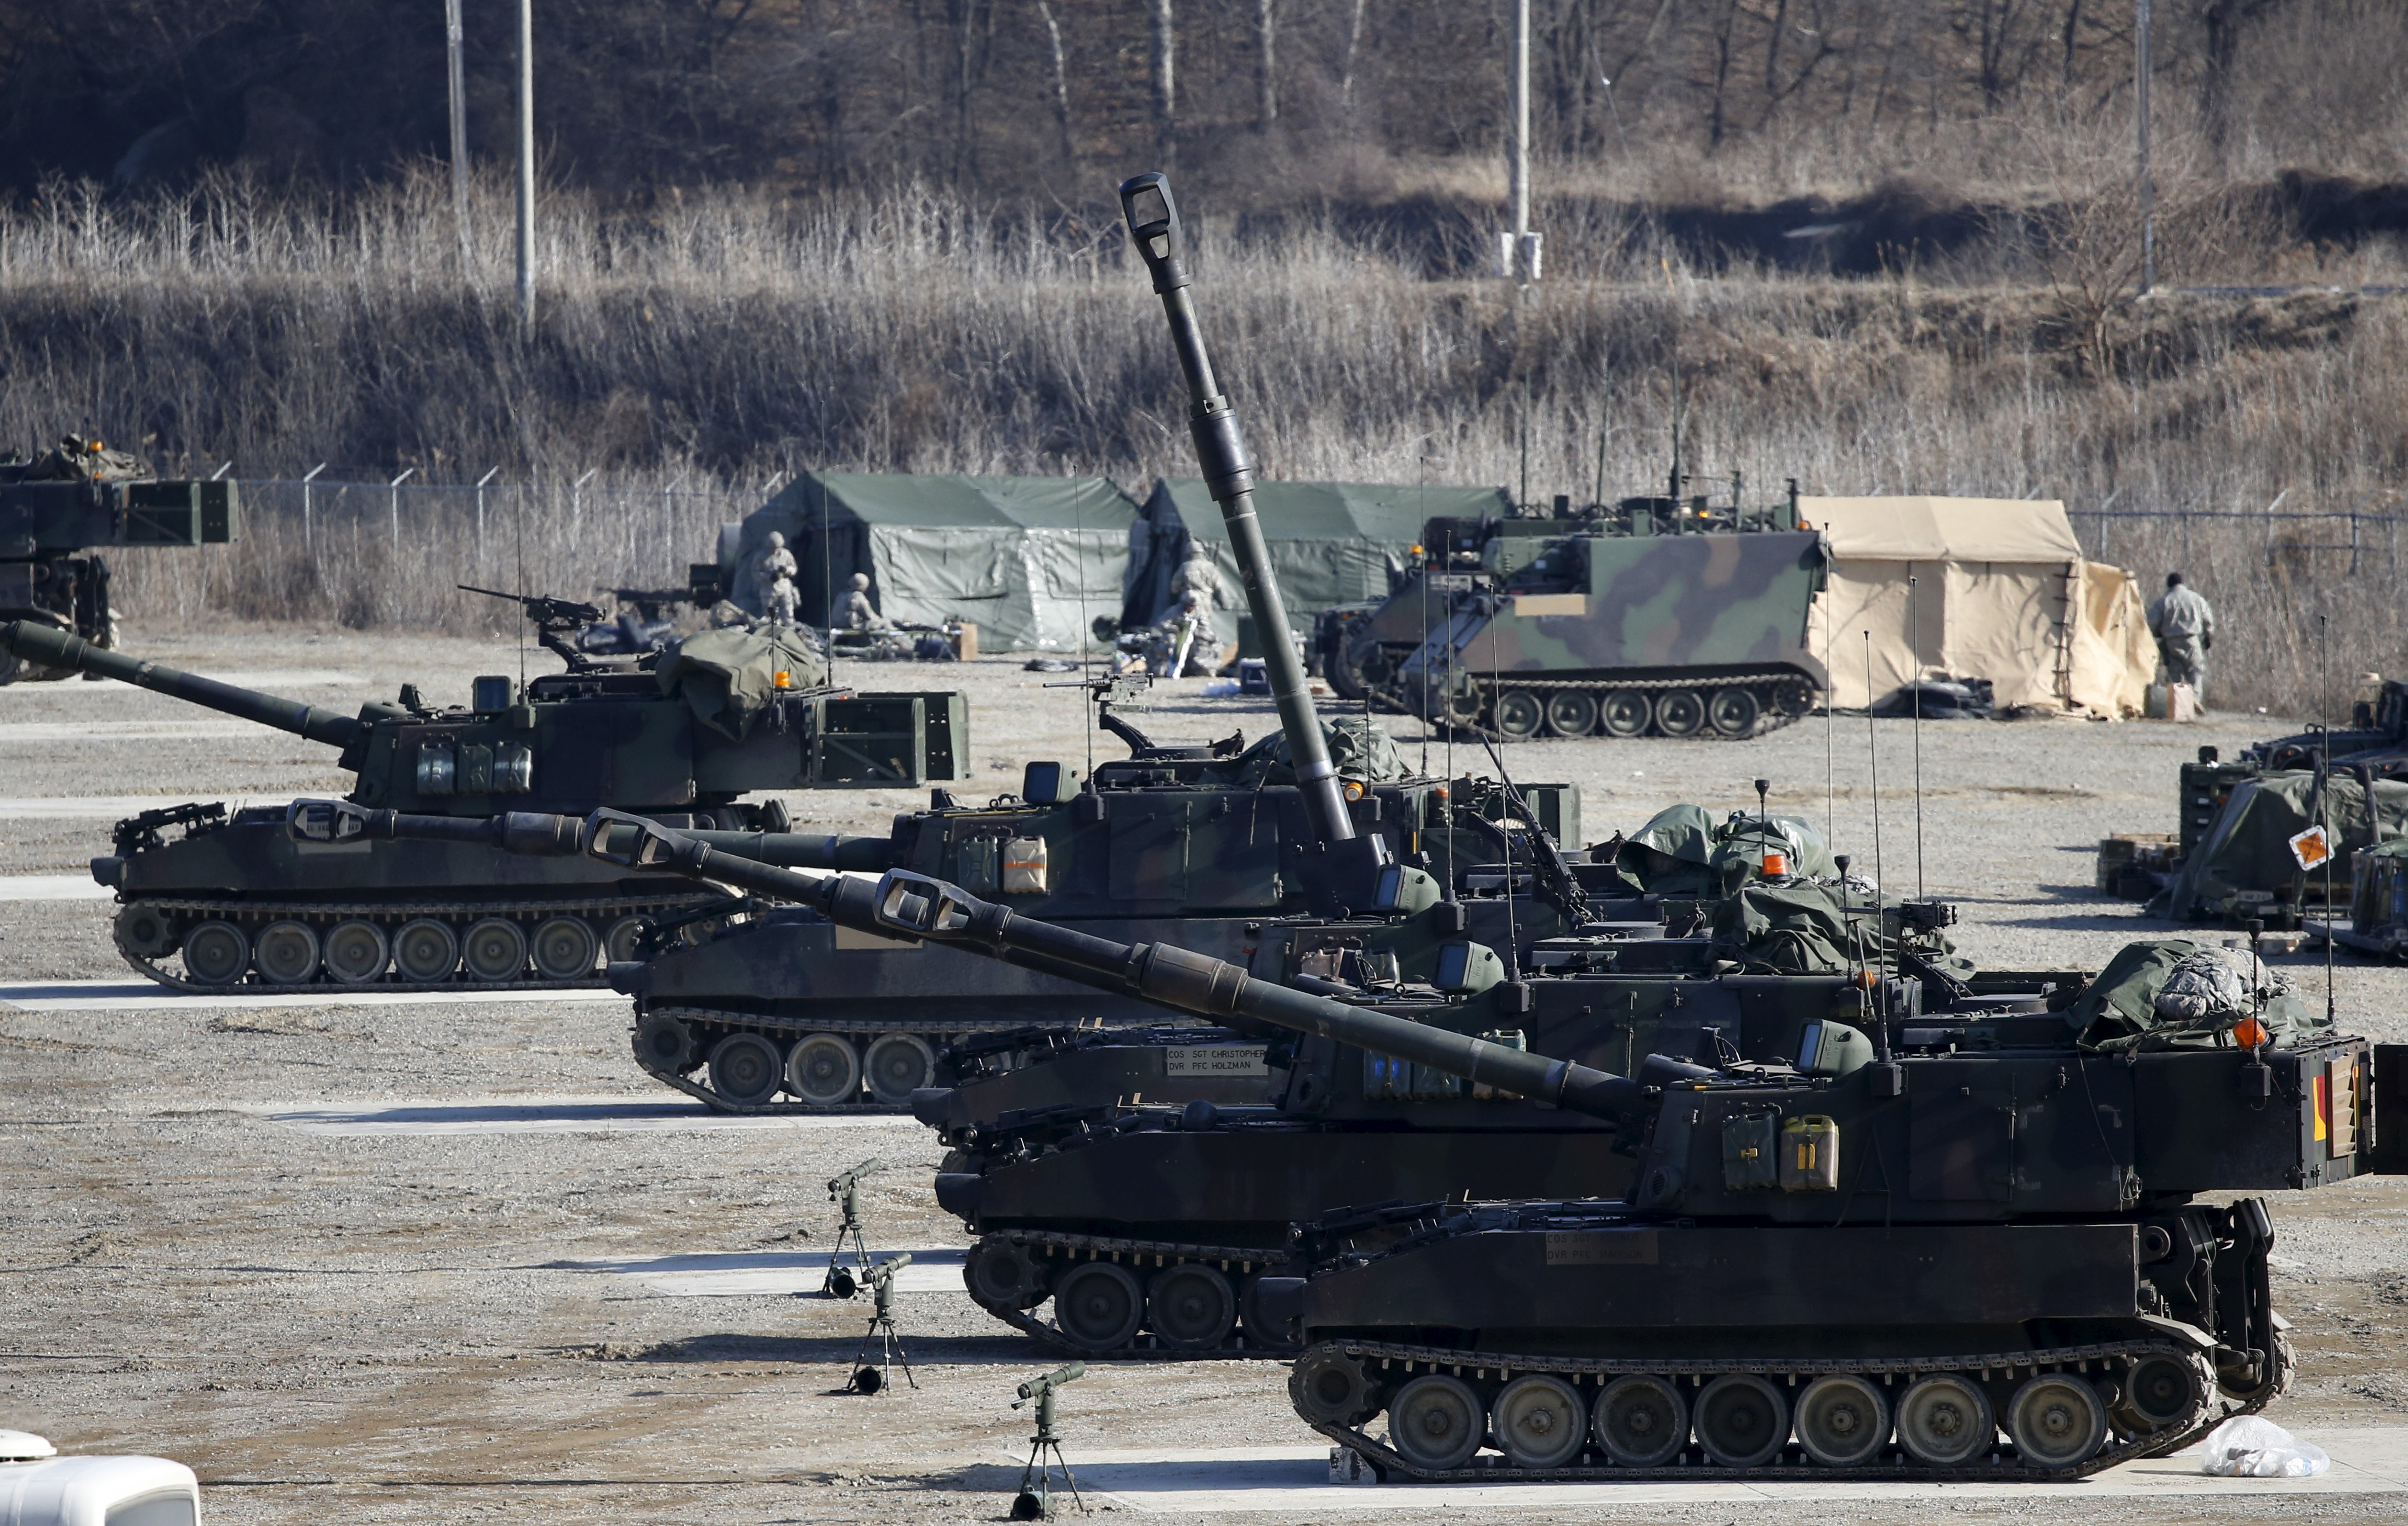 U.S. Army M109A6 Paladin self-propelled howitzers are seen during a military exercise in Pocheon